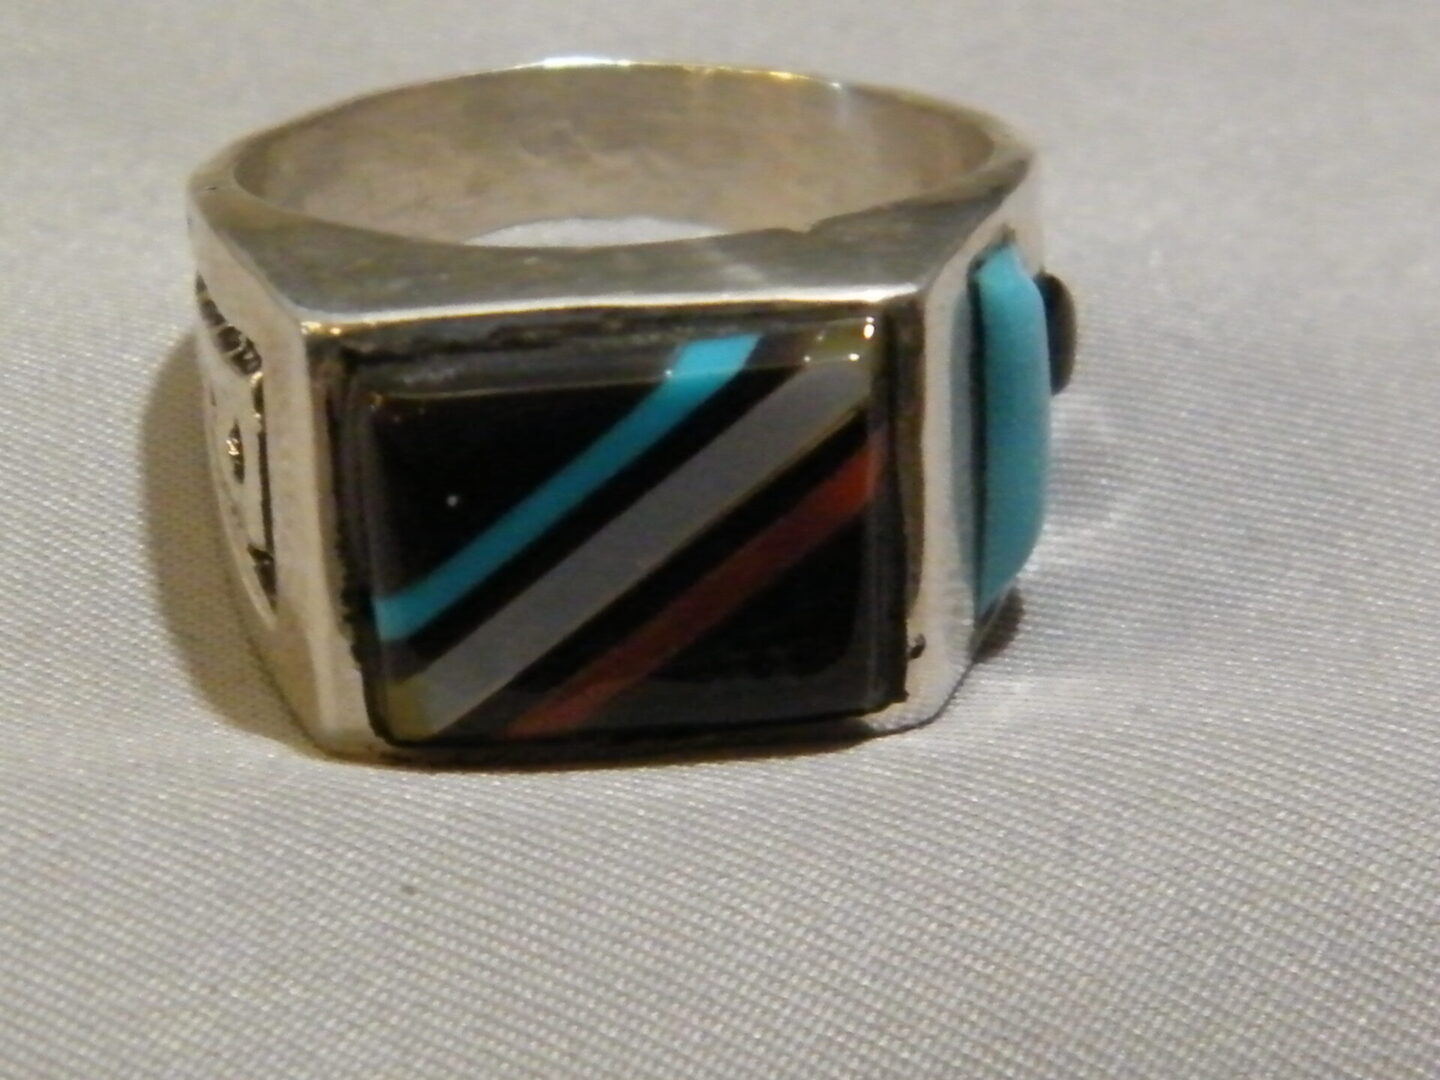 A Silver Ring With Black, Red and Blue Color Square Stone